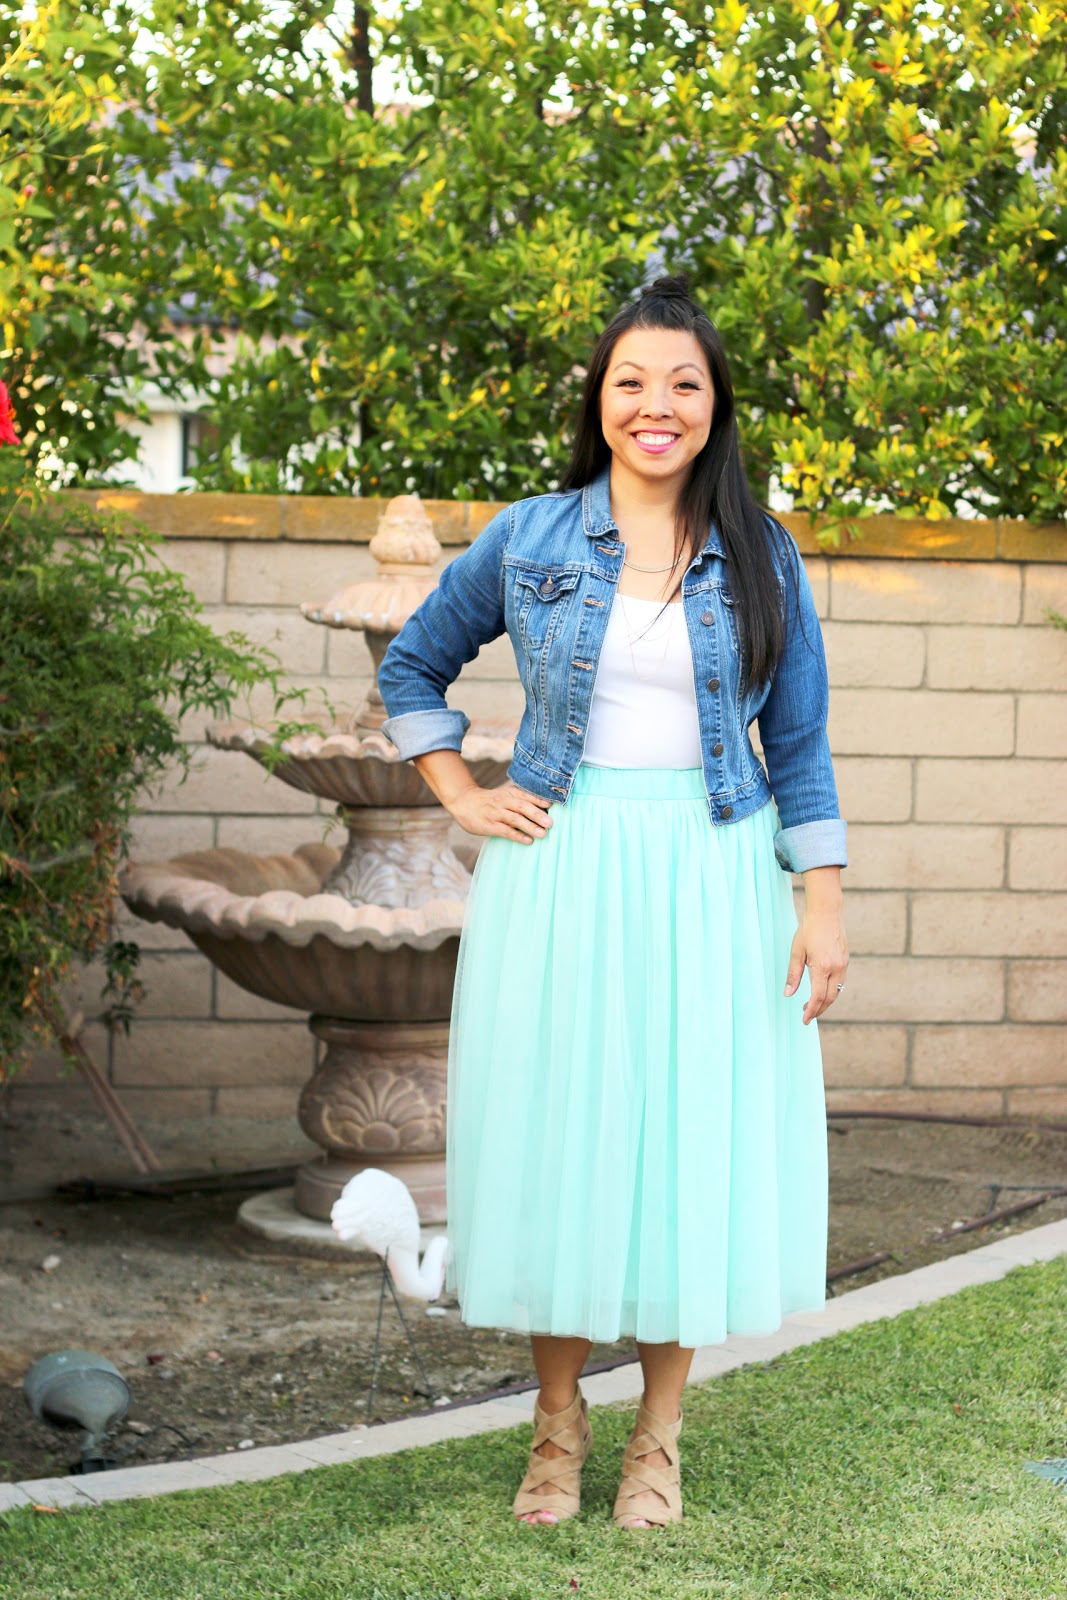 Denim Jacket With Tulle Skirt Fairy Country Chic 